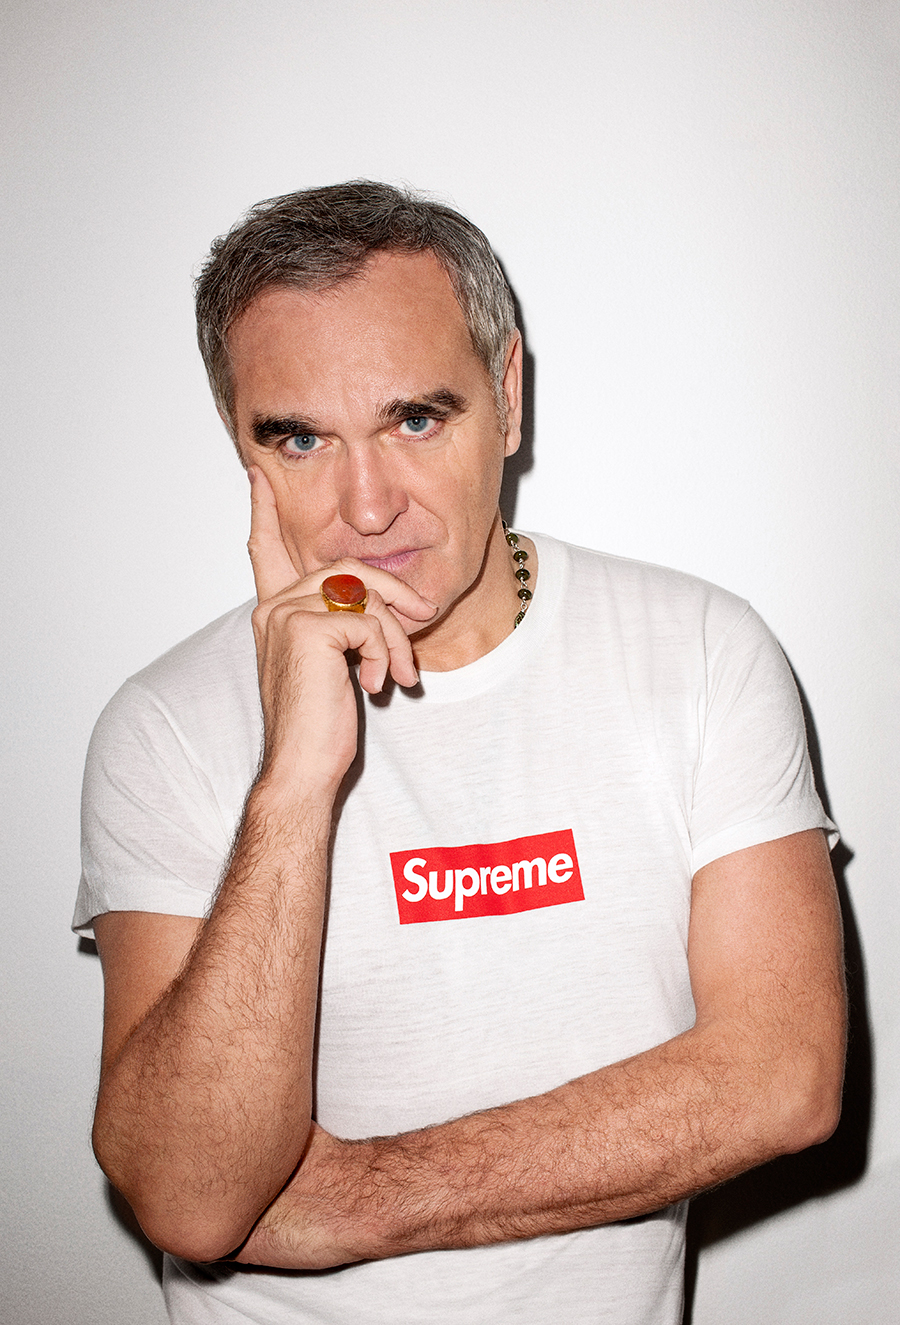 Supreme Morrissey Poster Culture Posters